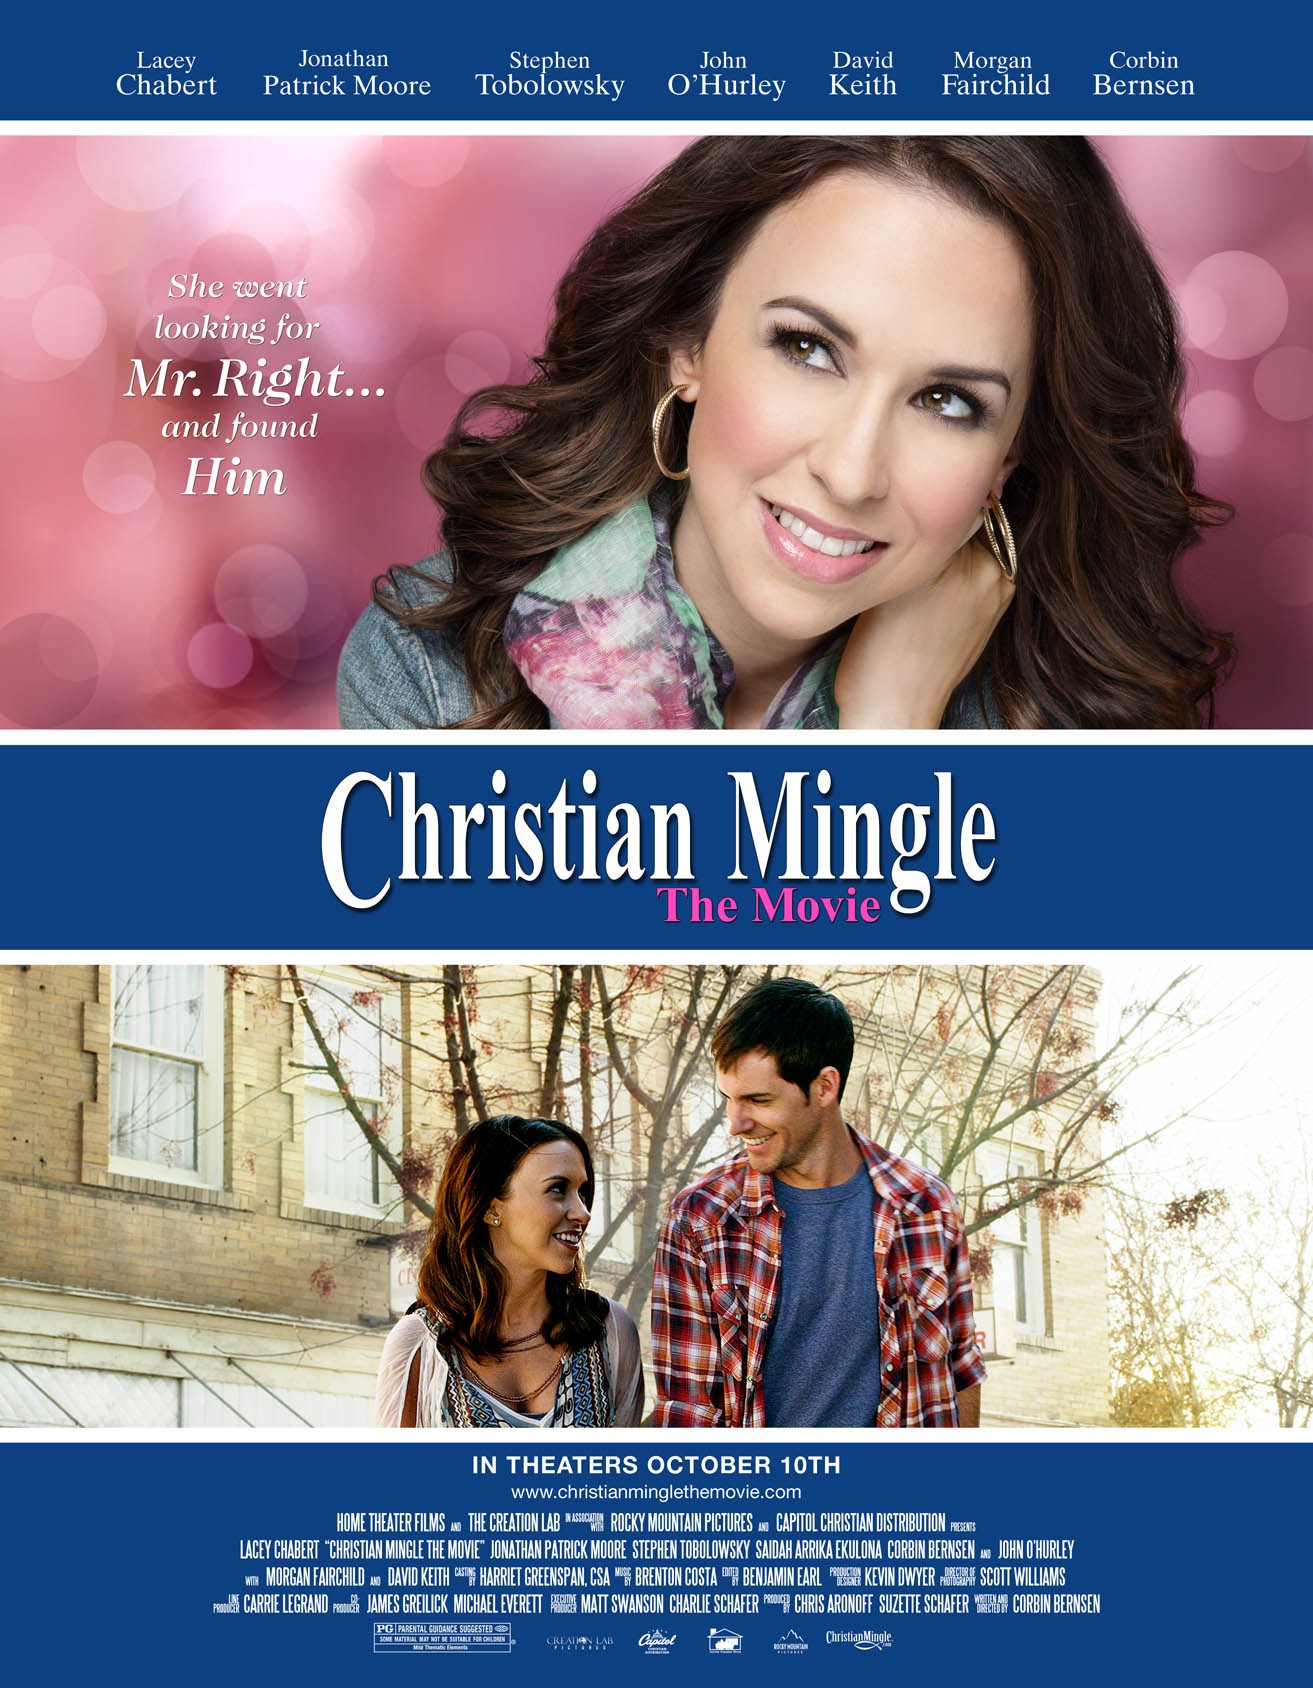 Poster of Rocky Mountain Pictures' Christian Mingle (2014)